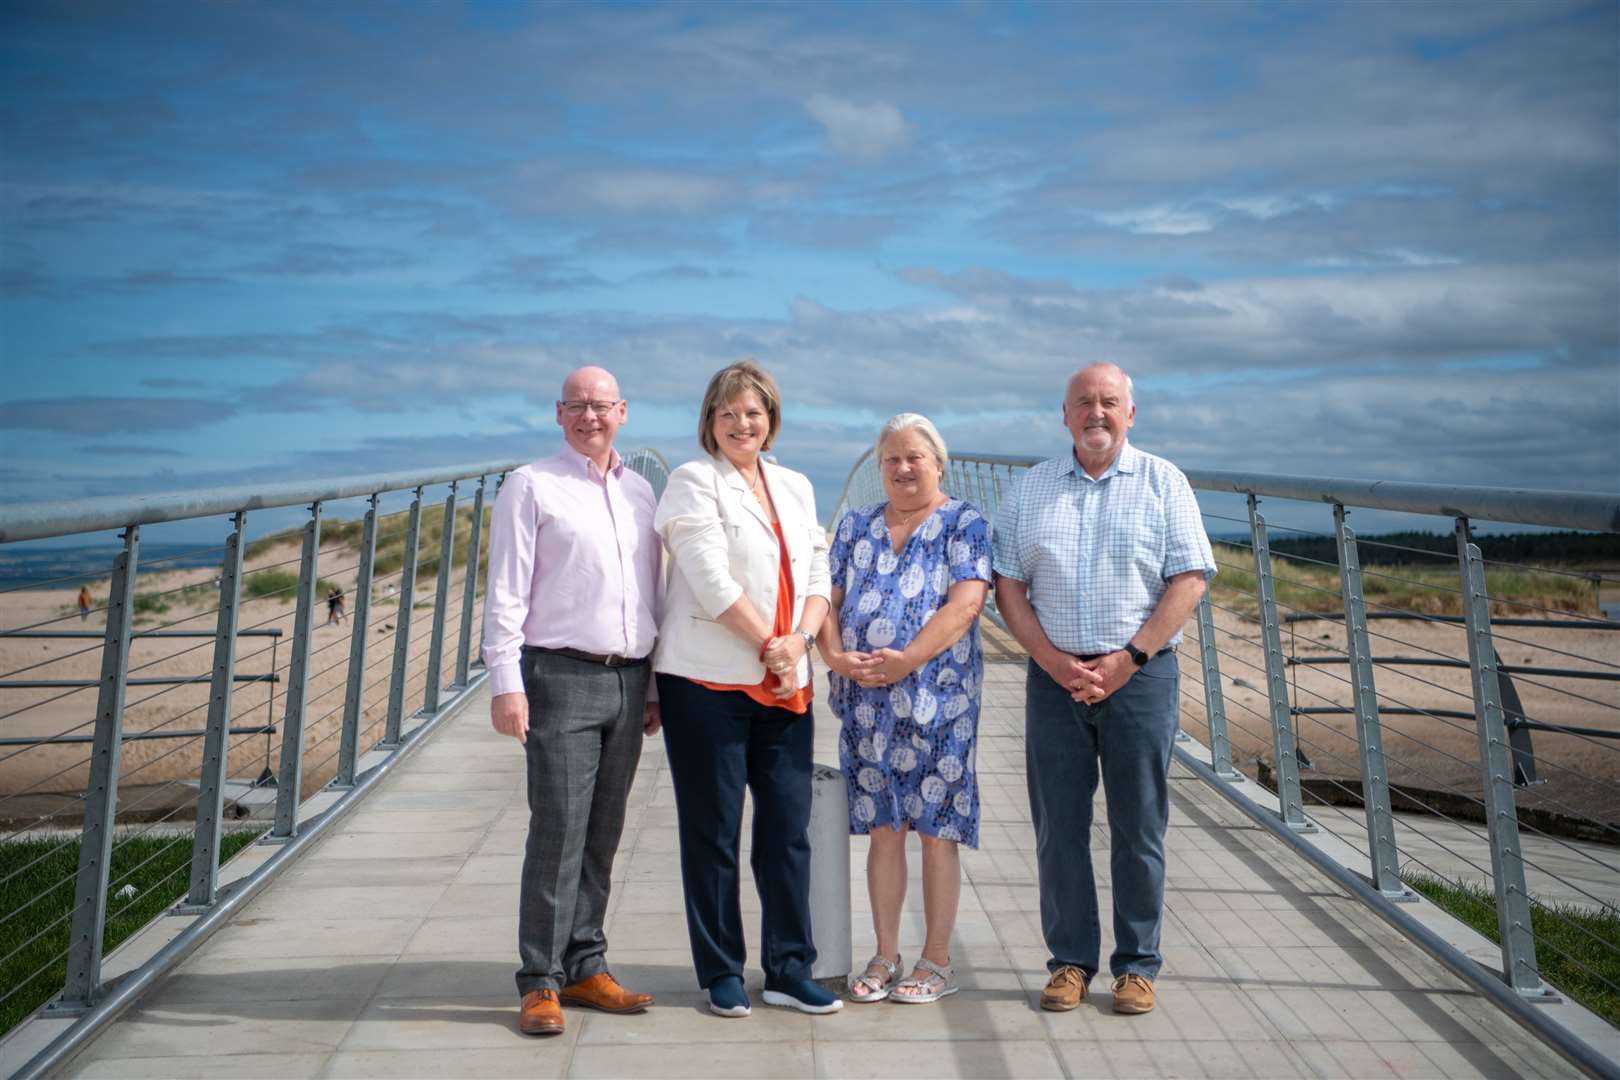 A replacement bridge at Lossiemouth's East Beach was one of the projects supported by the Beatrice Community Fund. From left: David Shearer, Fiona Morrison (SSE Renewables community investment managers), Fiona Birse and Rab Forbes (Lossiemouth Community Development Trust). Picture: SSE